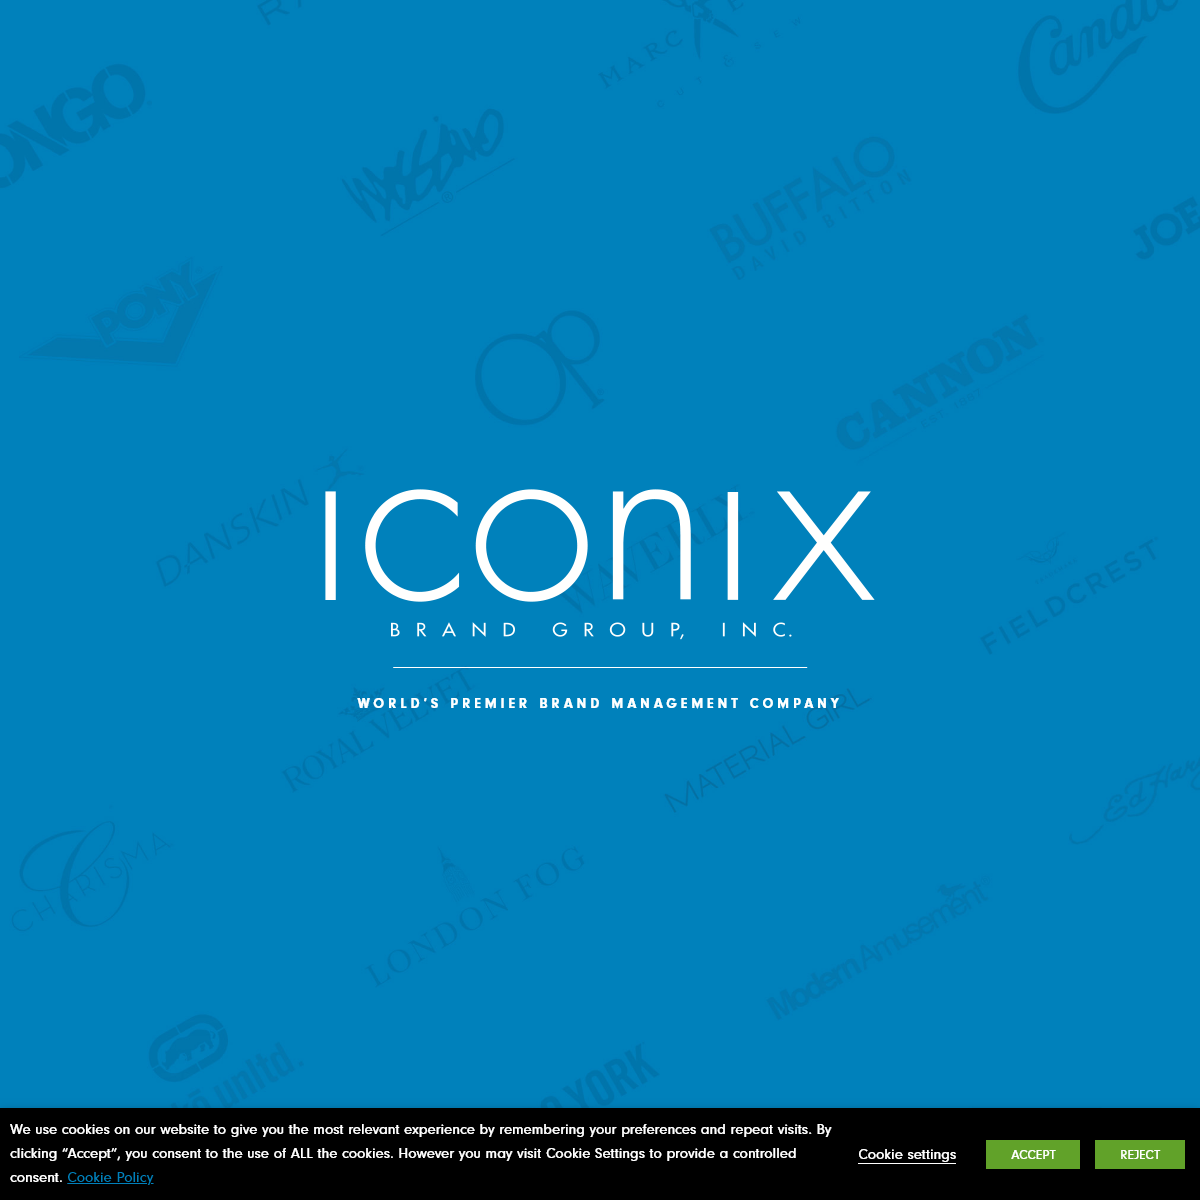 A complete backup of iconixbrand.com